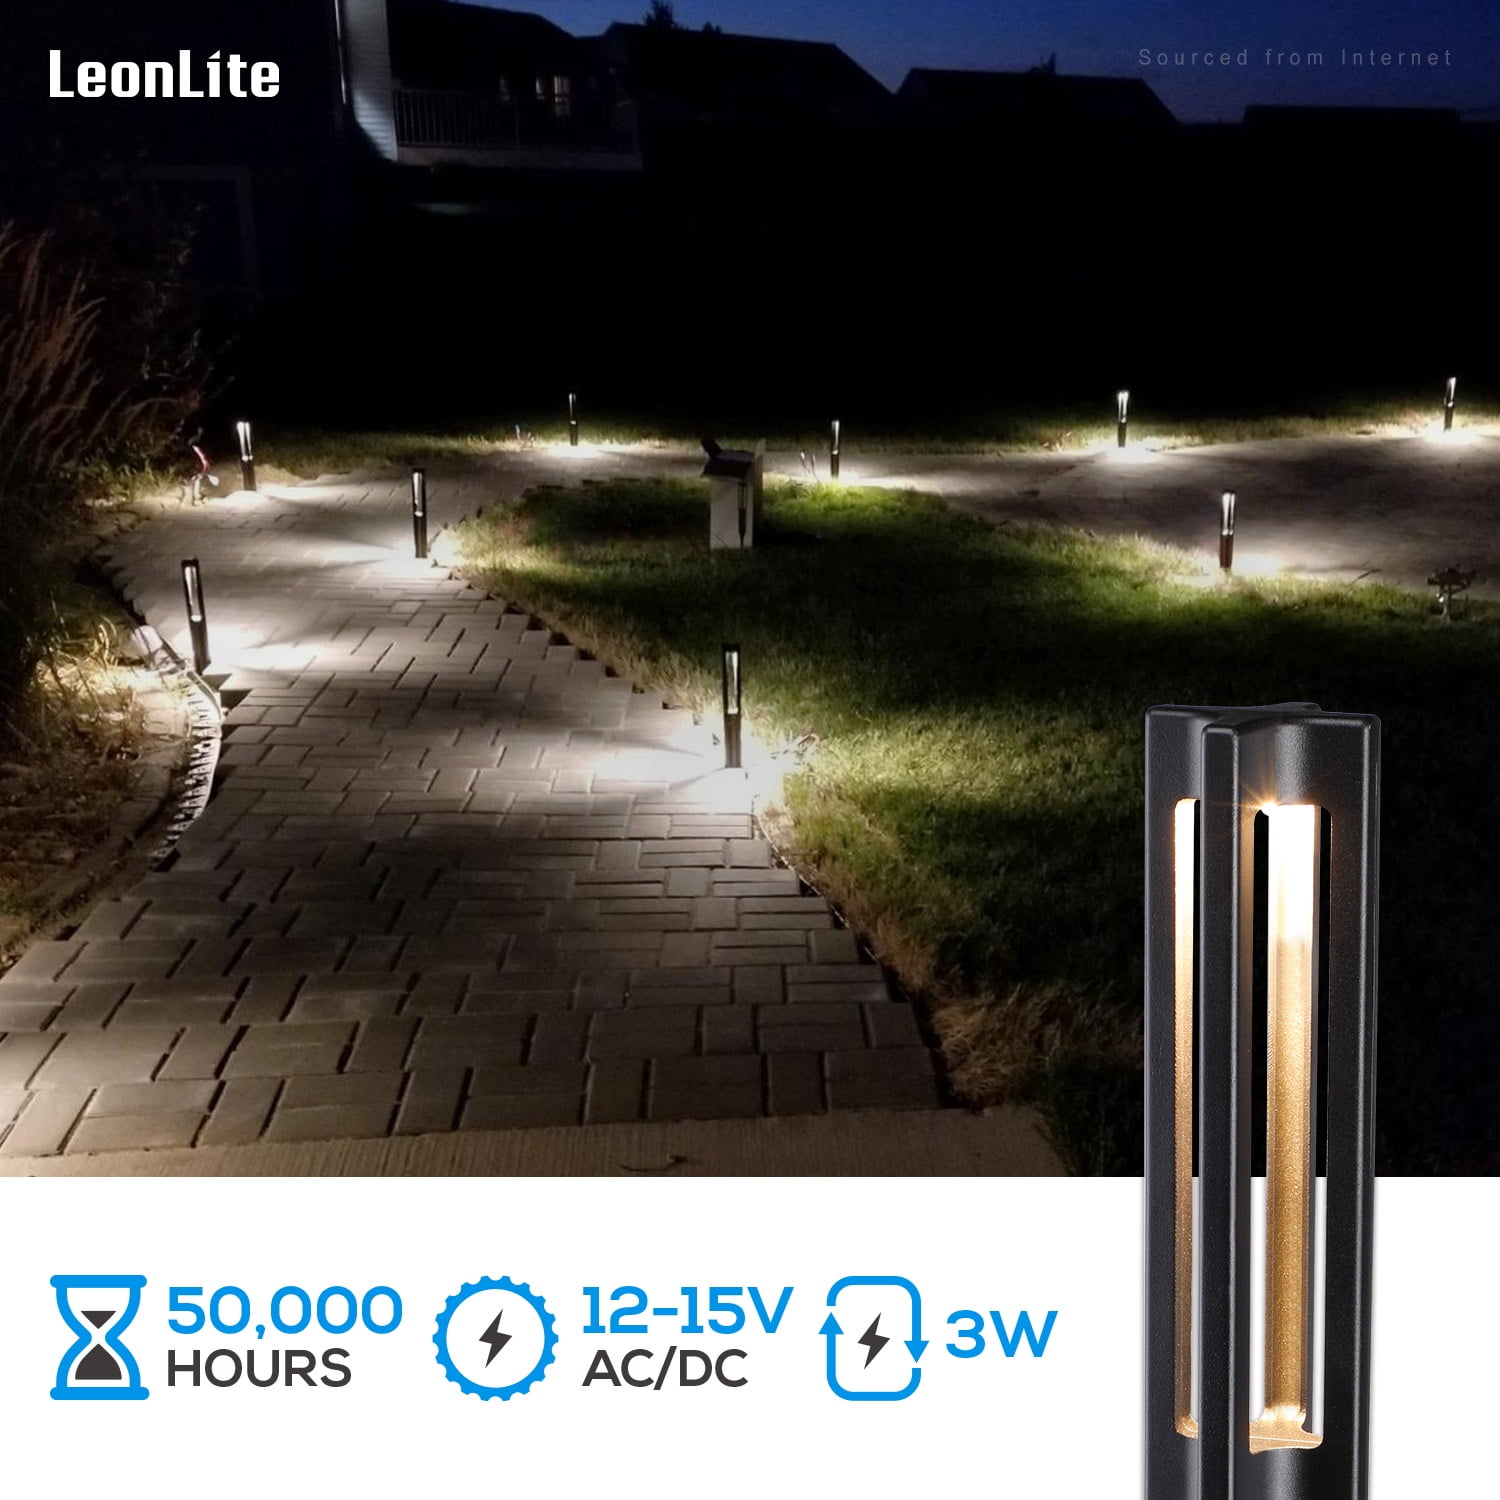 LEONLITE 10-PACK 12V Low Voltage LED Landscape Light, 3W Walkway Lawn Lights  with Aluminum Housing for Outdoor, Yard, Patio, IP65, 4000K Cool White,  50,000 Hours Lifespan